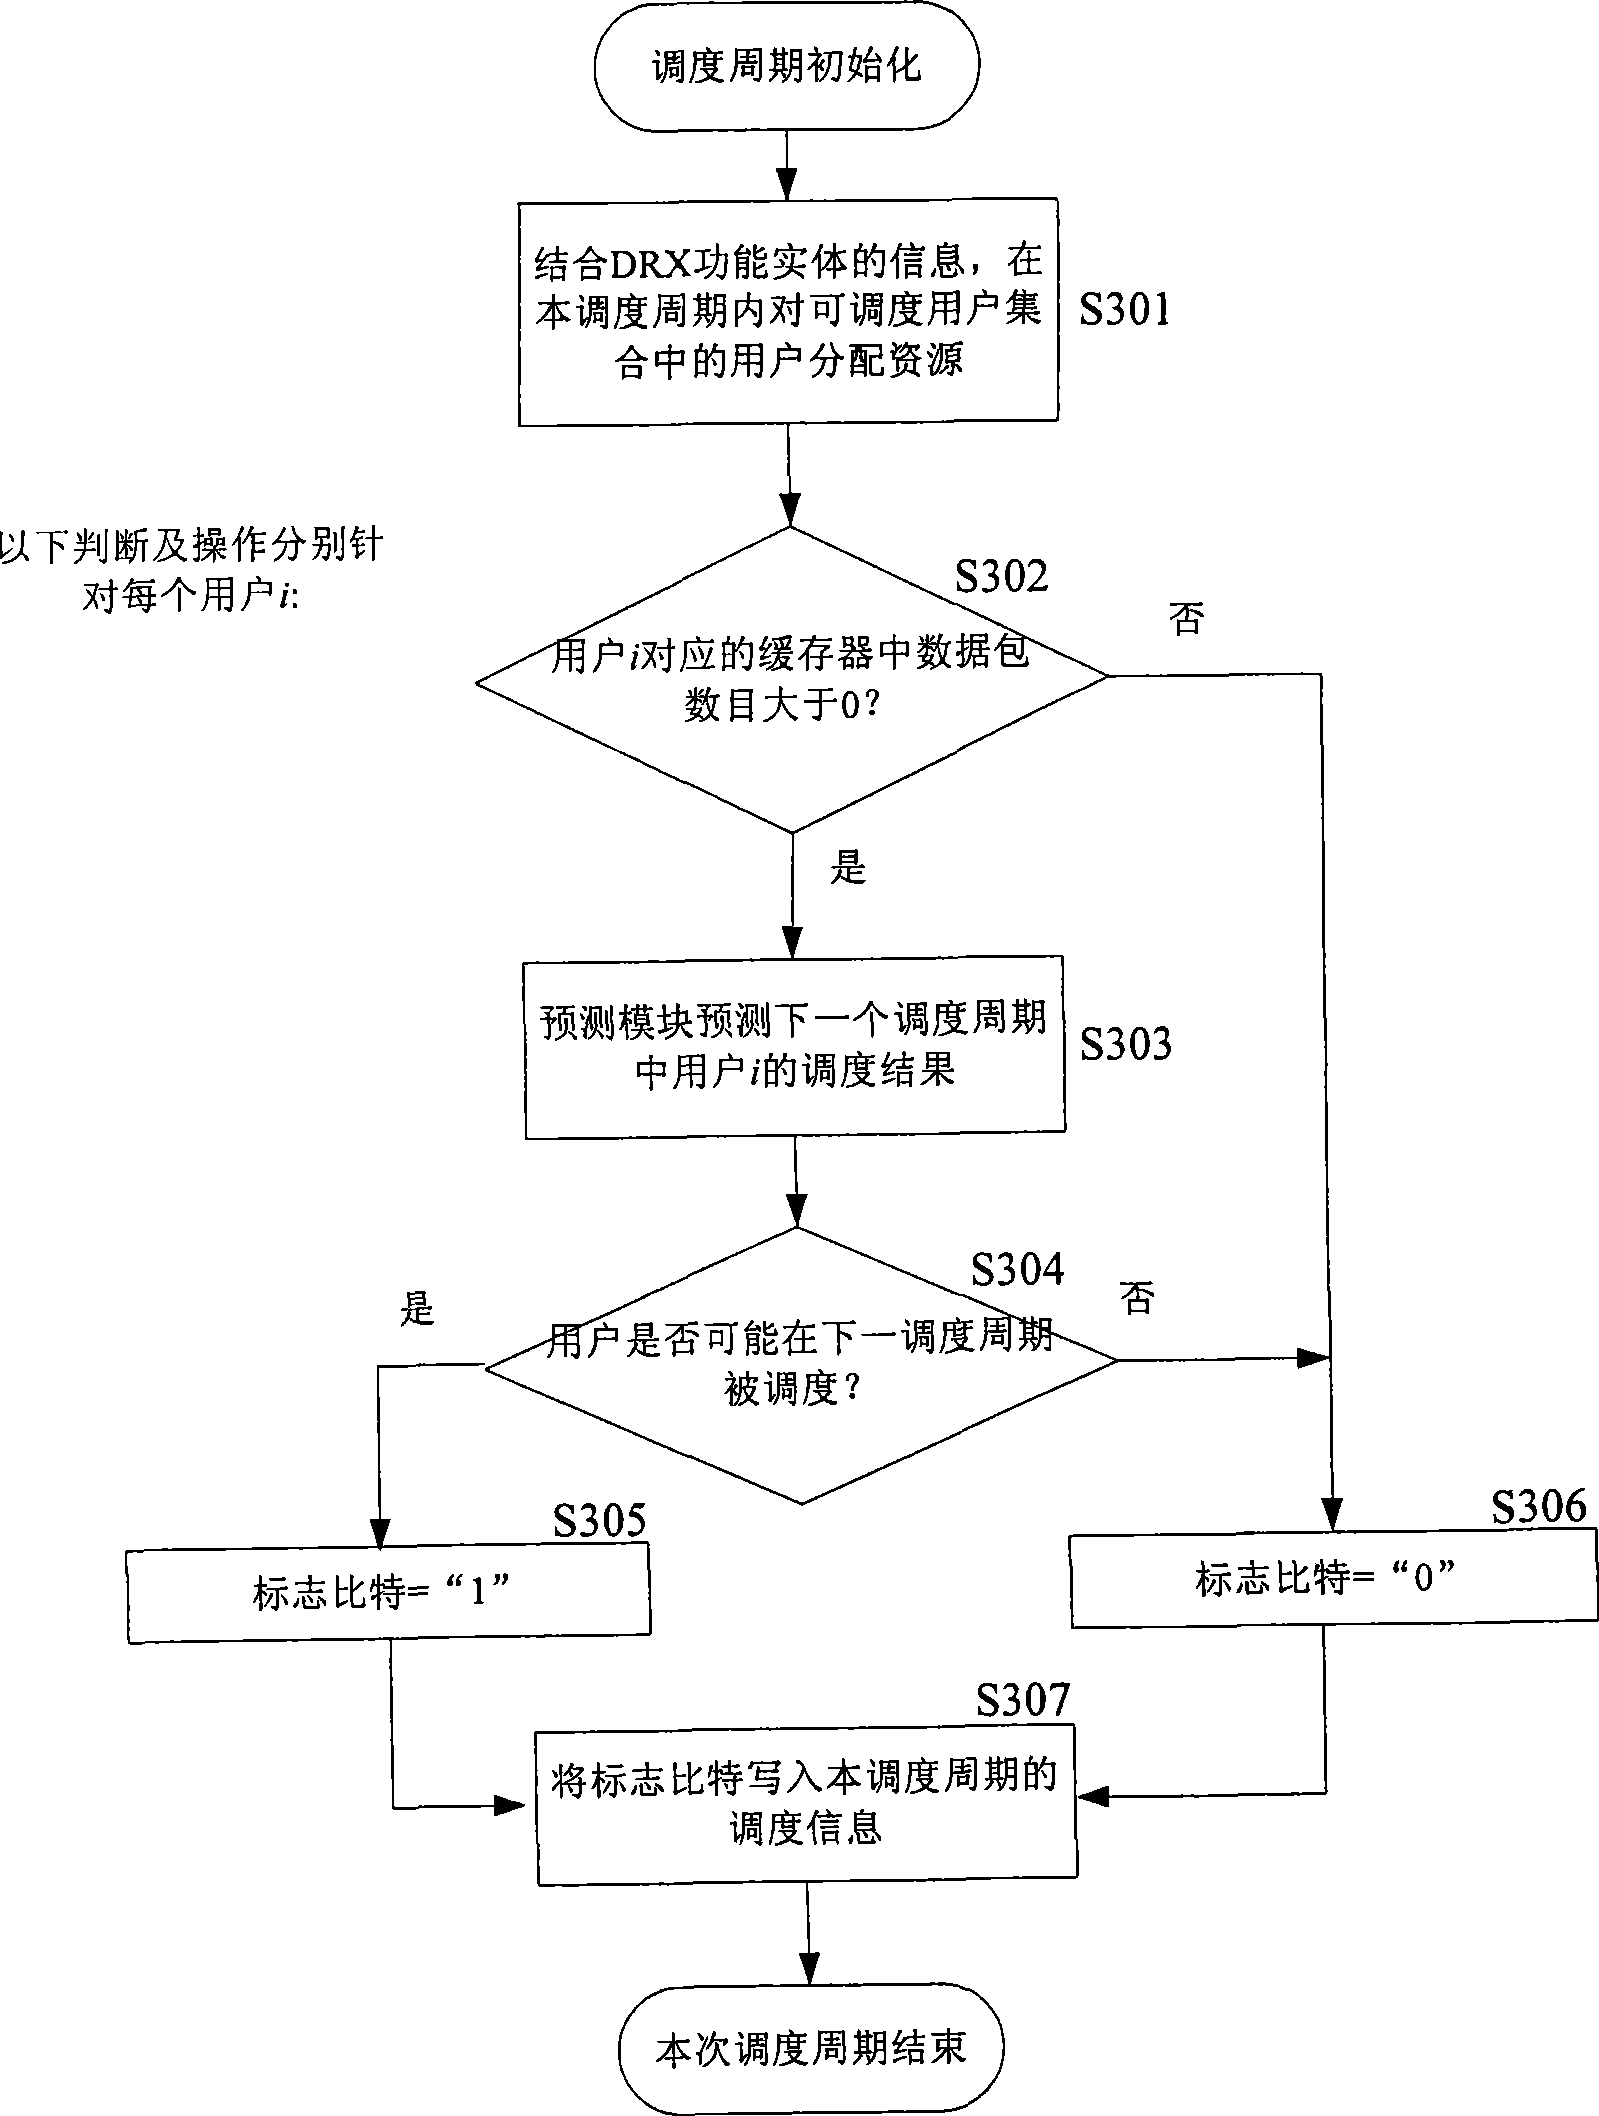 Method and apparatus for dynamically controlling uncontinuous receiving